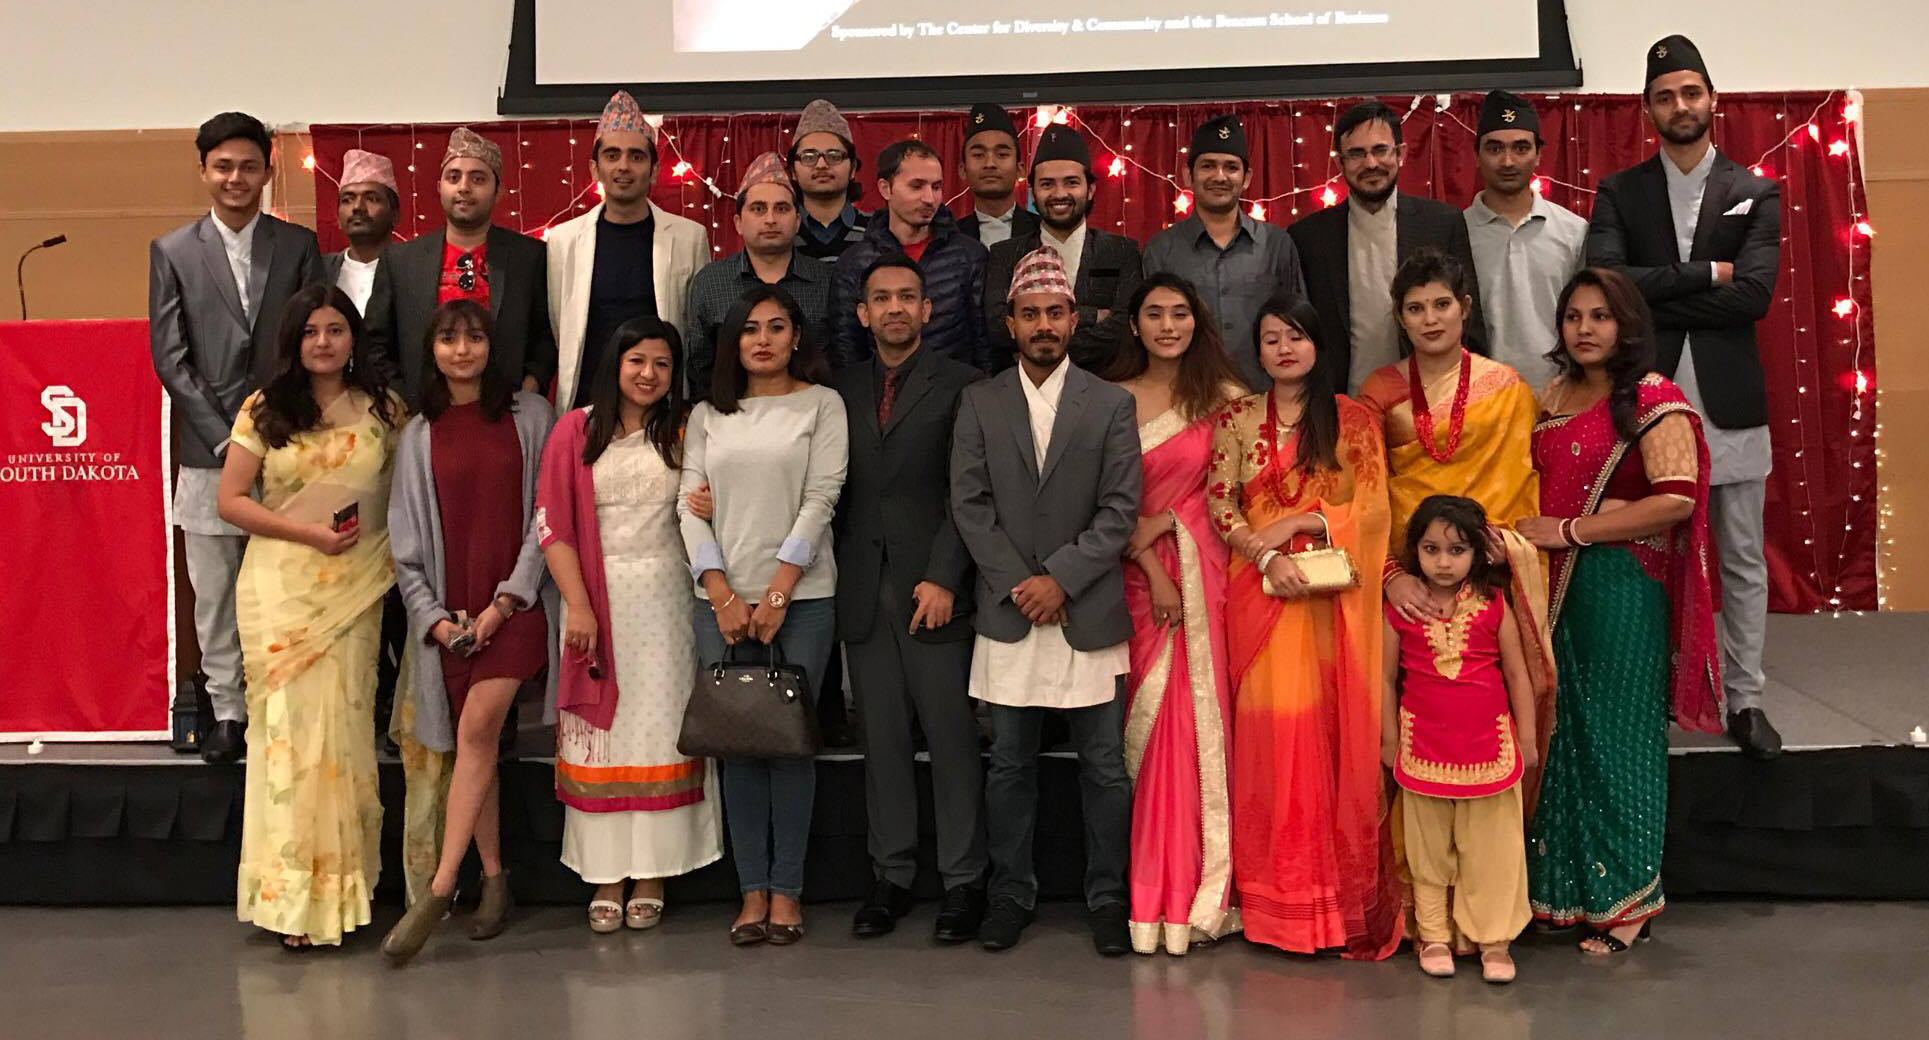 New organization founded to represent Nepalese culture